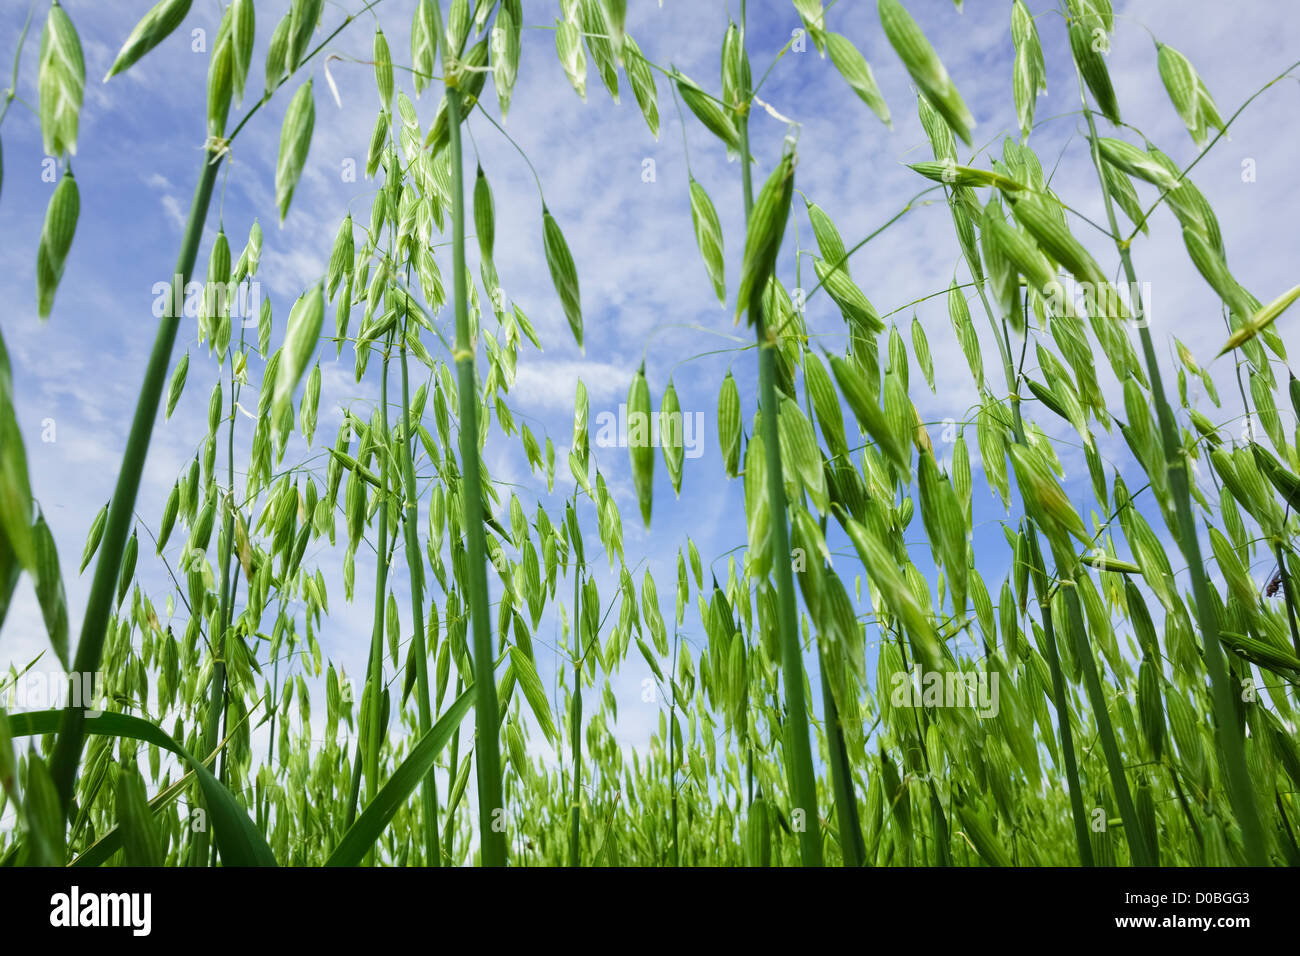 Cereal crop. Low angle photo of oats growing in a field. Stock Photo